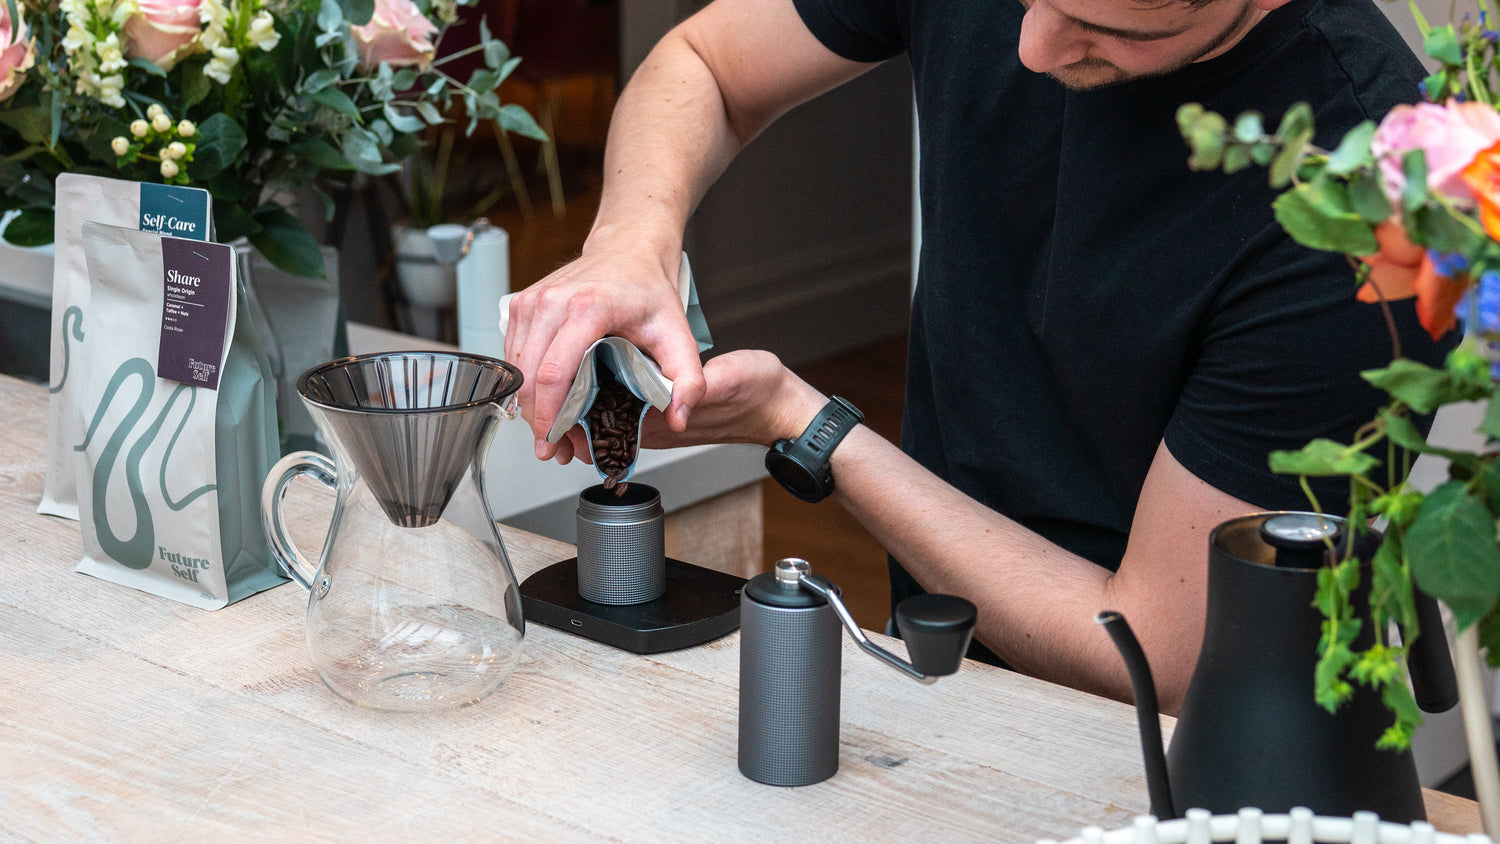 Coffee being made by a barista using the pour over method